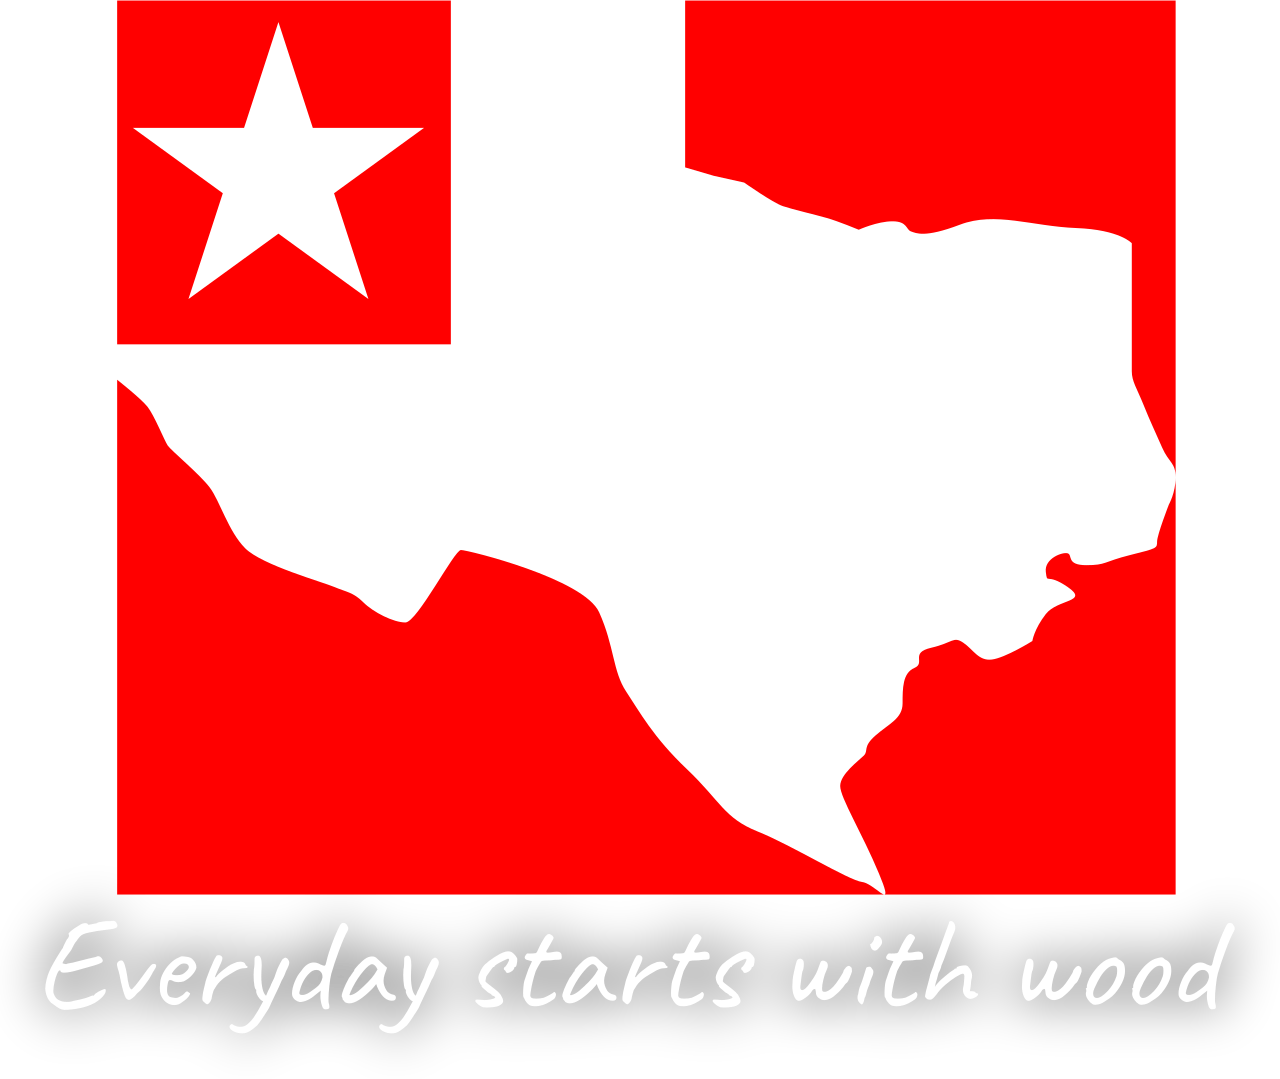 Wing’s Texas BBQ's web page